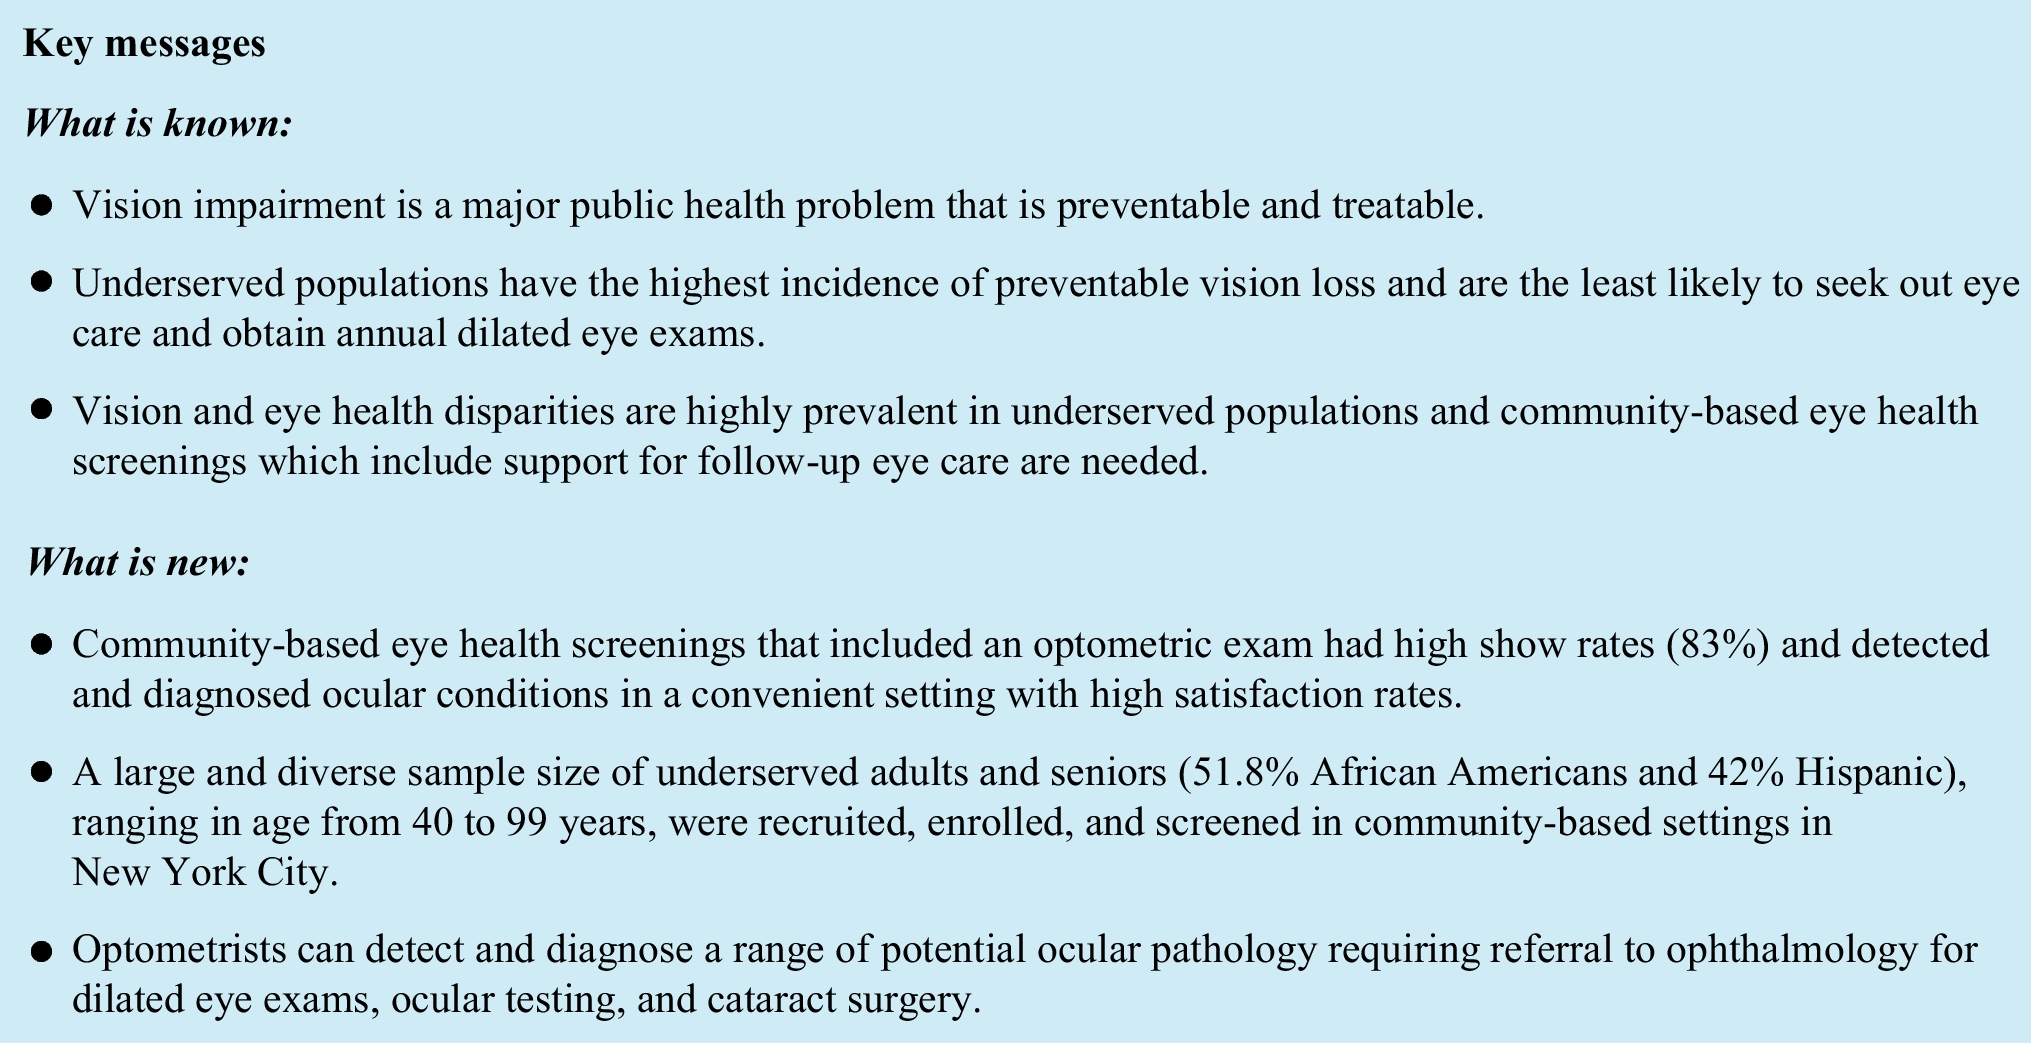 Manhattan Vision Screening and Follow-Up Study (NYC-SIGHT): optometric exam improves access and utilization of eye care services